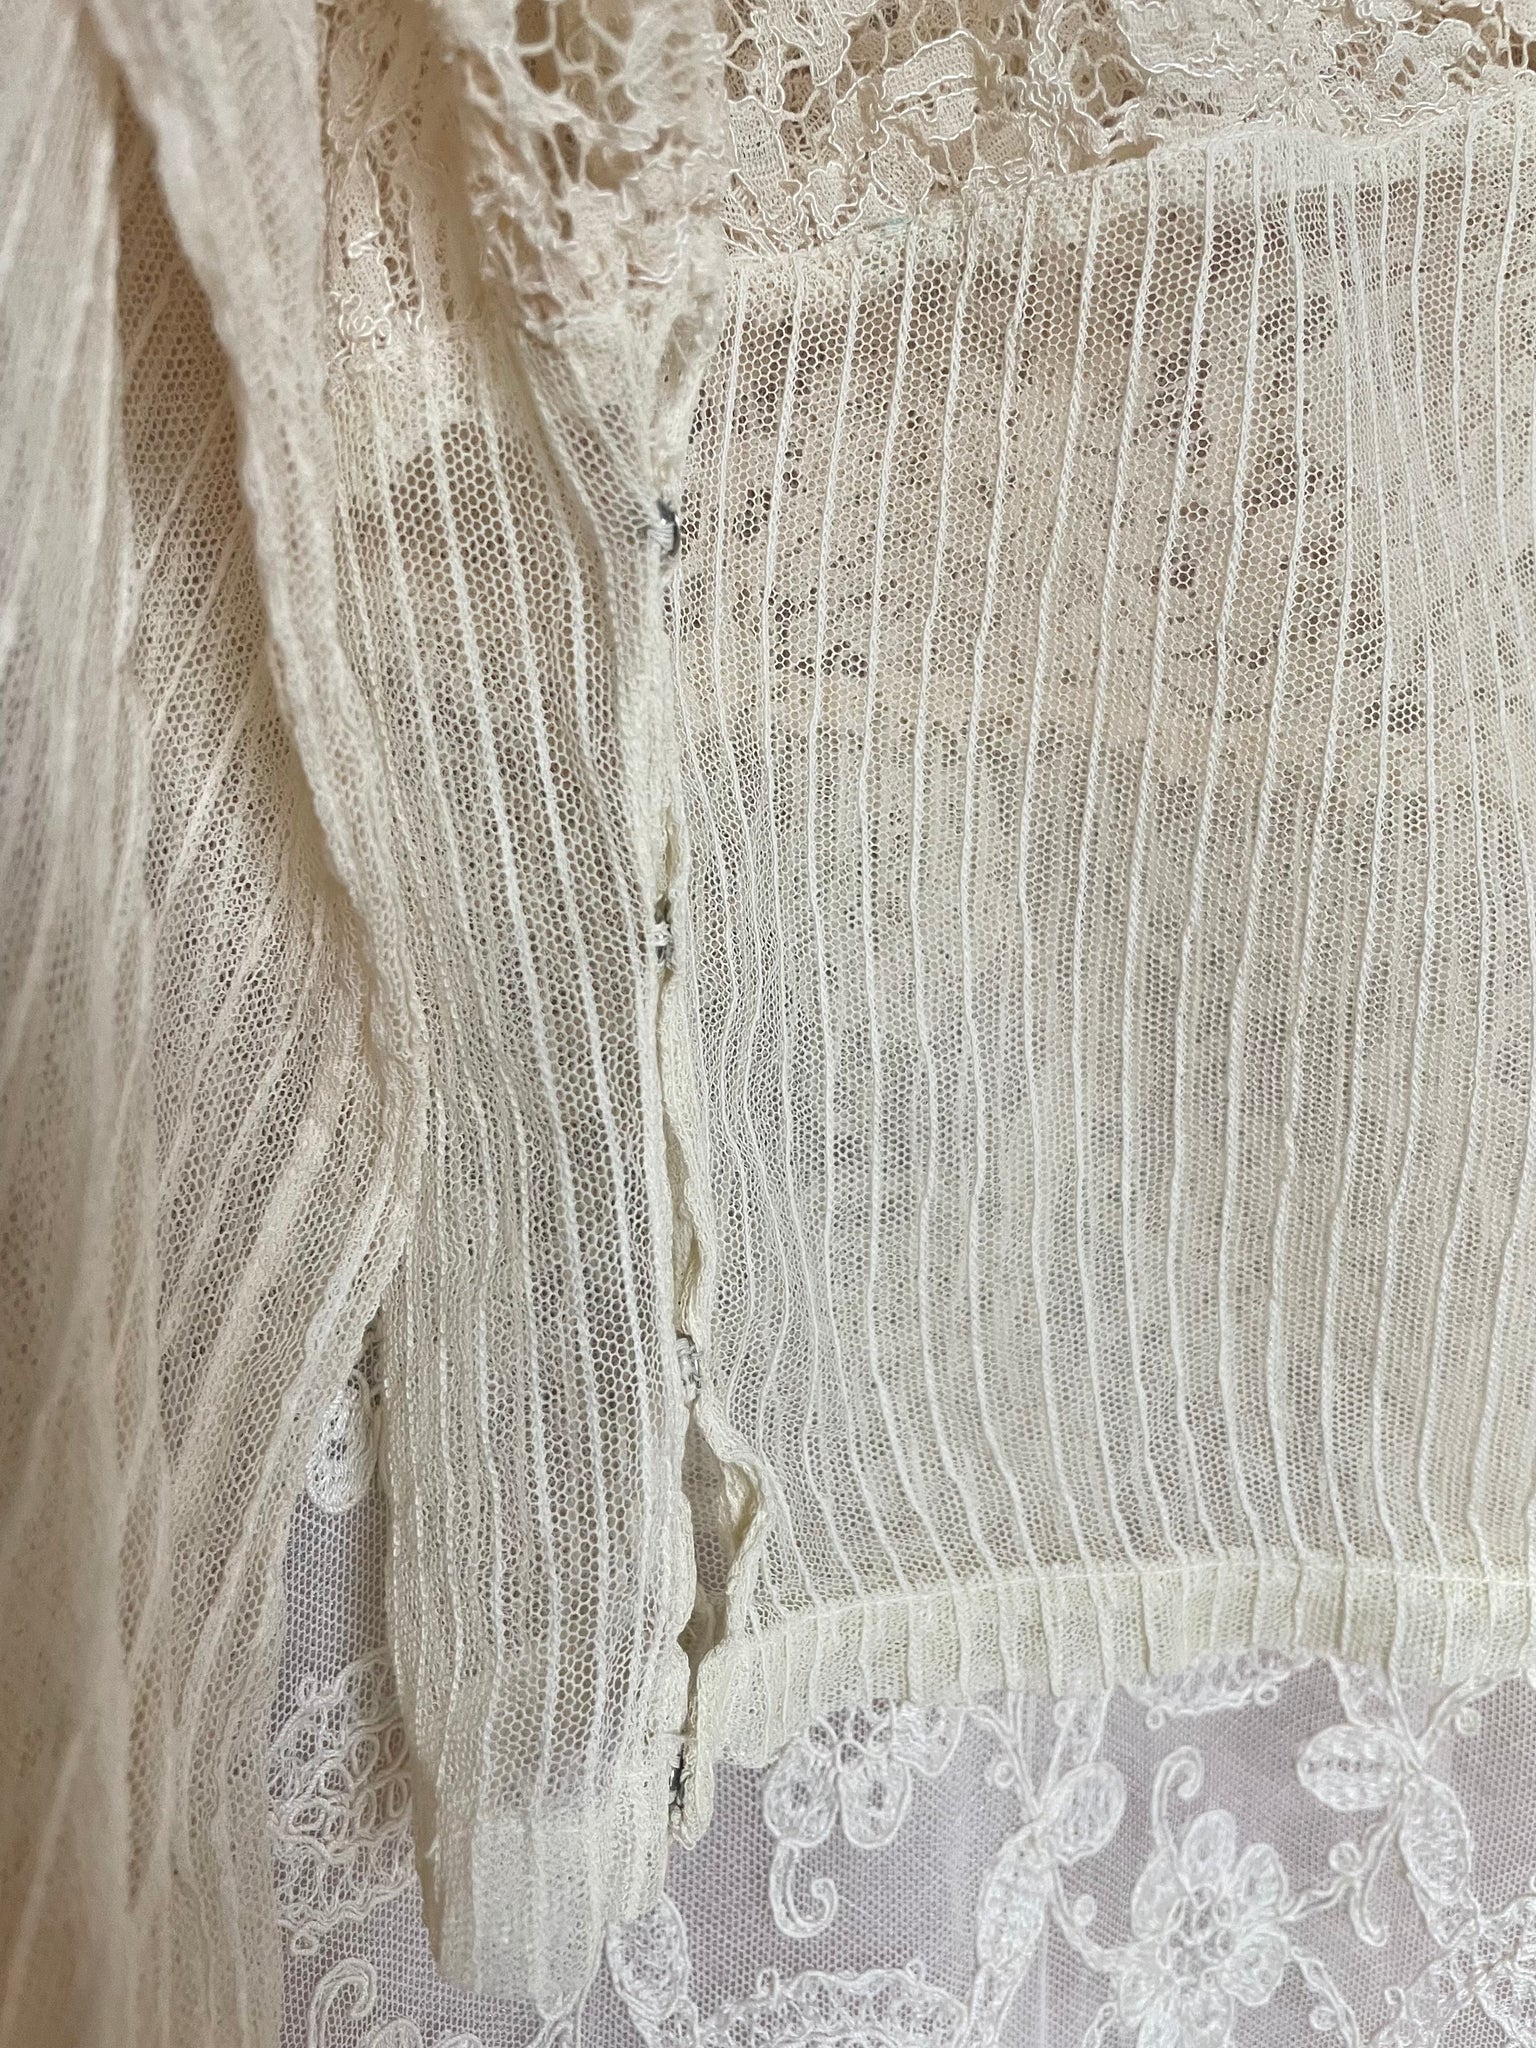 1930s Mesh Net Pintuck Lace Collared Blouse